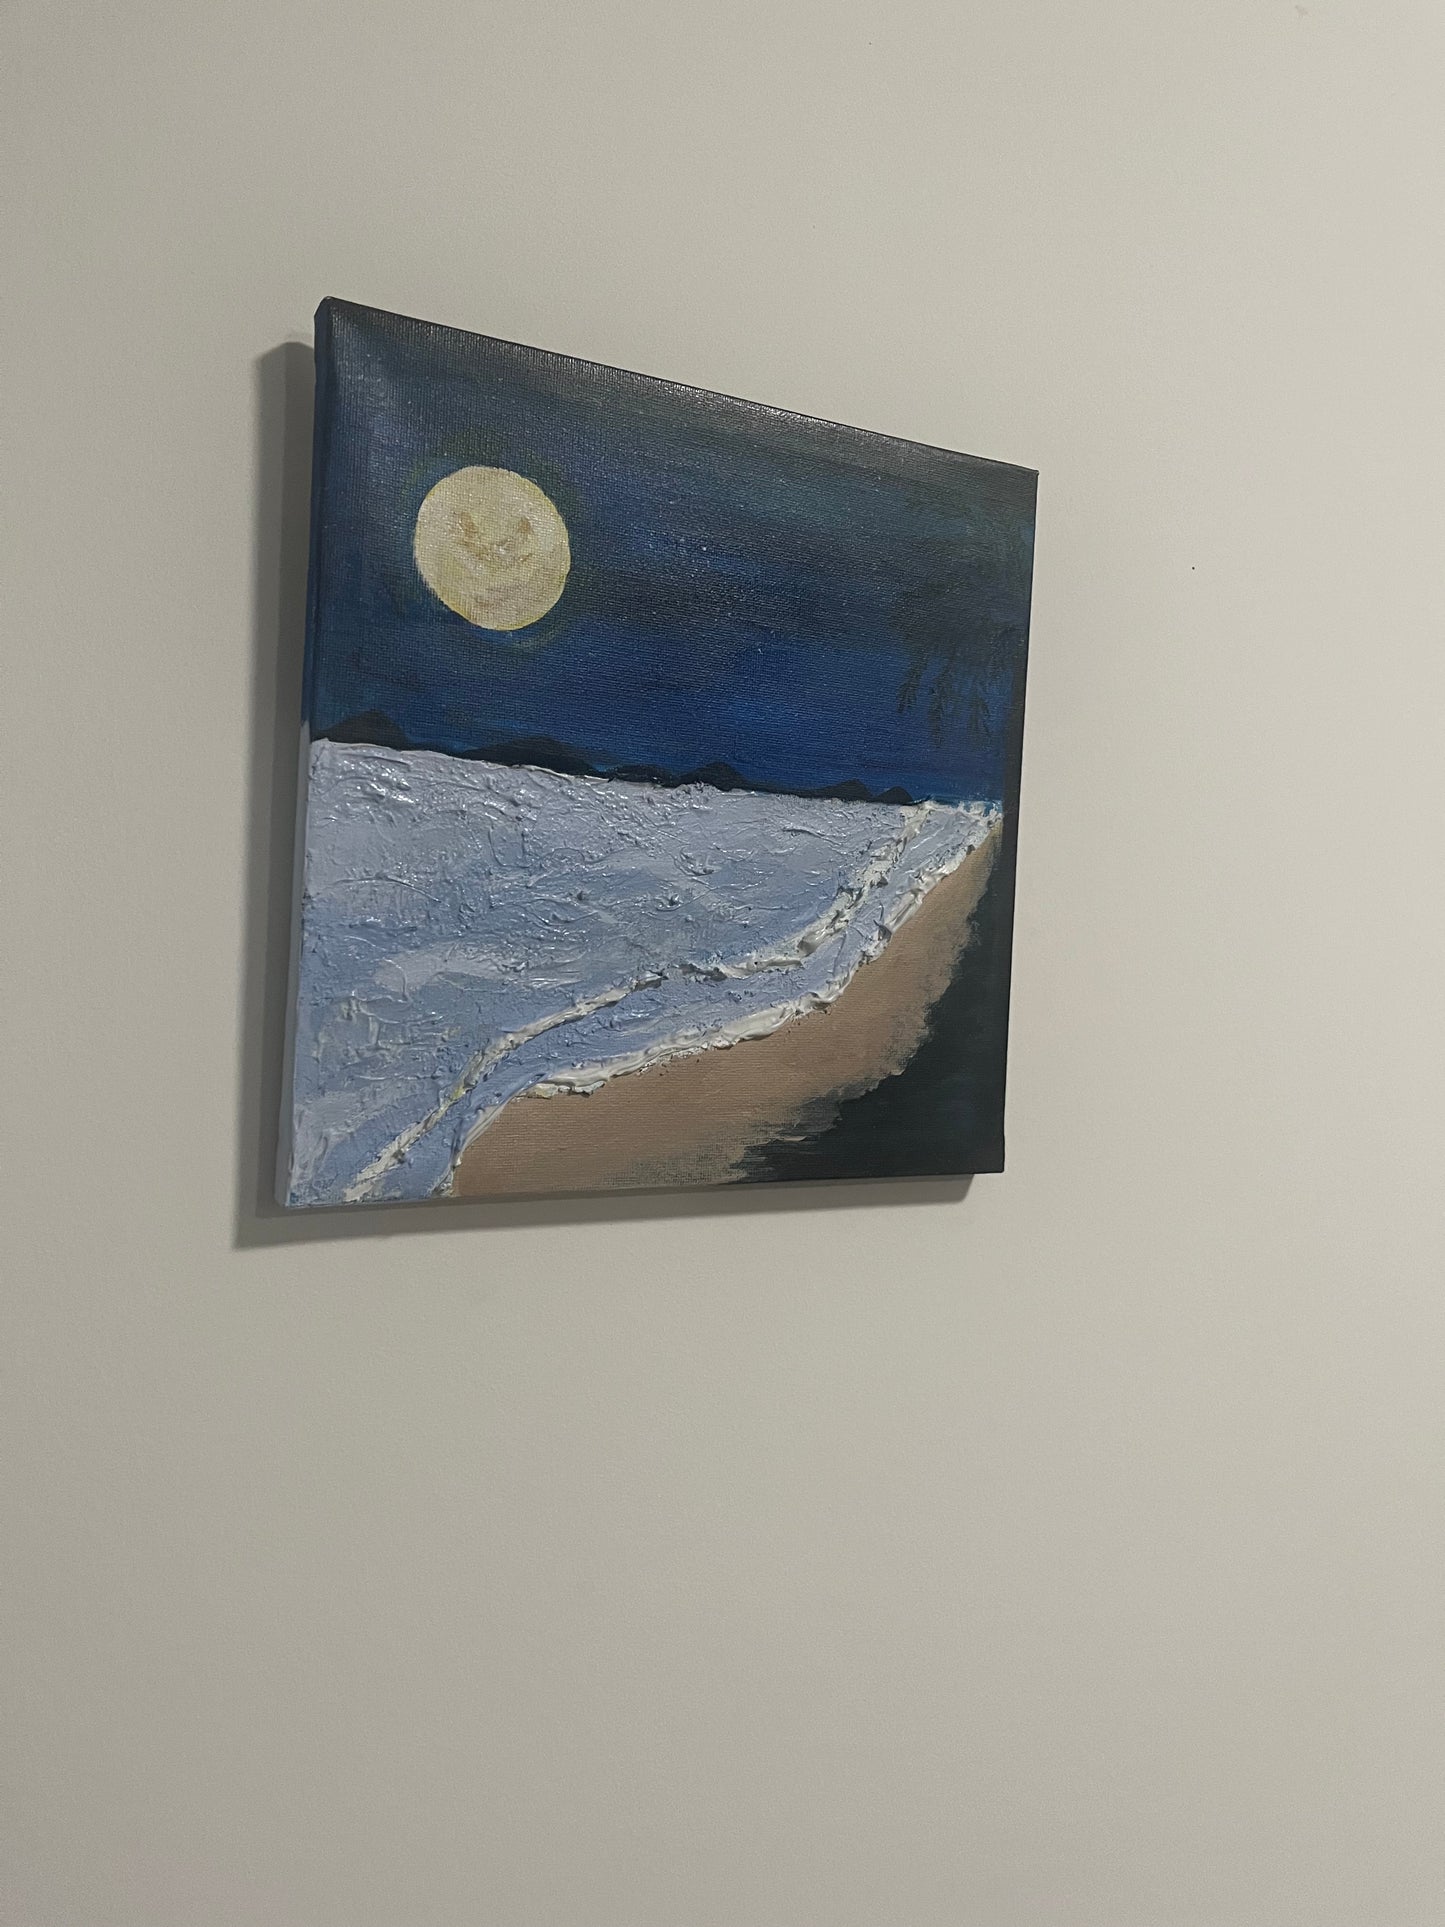 Moon over sea painting on canvas 10x10 inches, NightSea,Seascape Acrylic painting